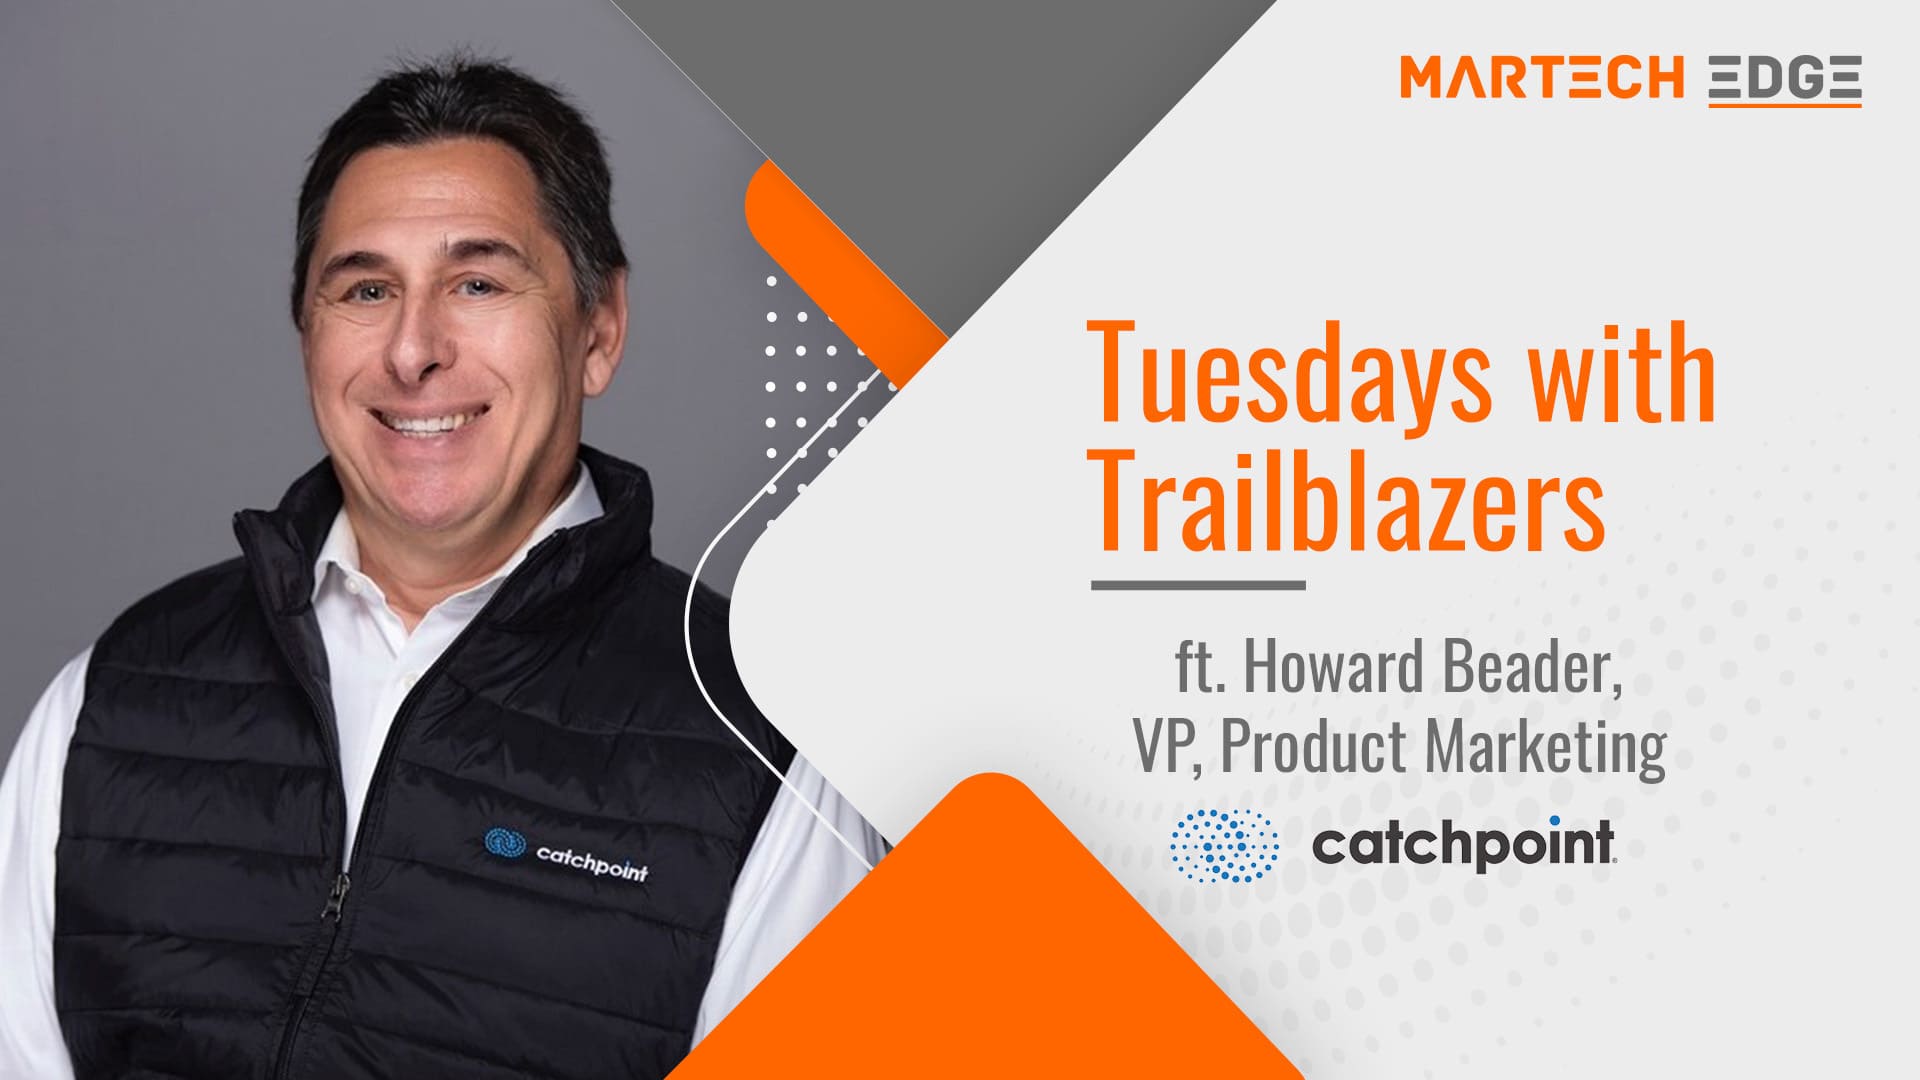 Tuesdays with Trailblazers ft. Howard Beader, VP Product Marketing, Catchpoint